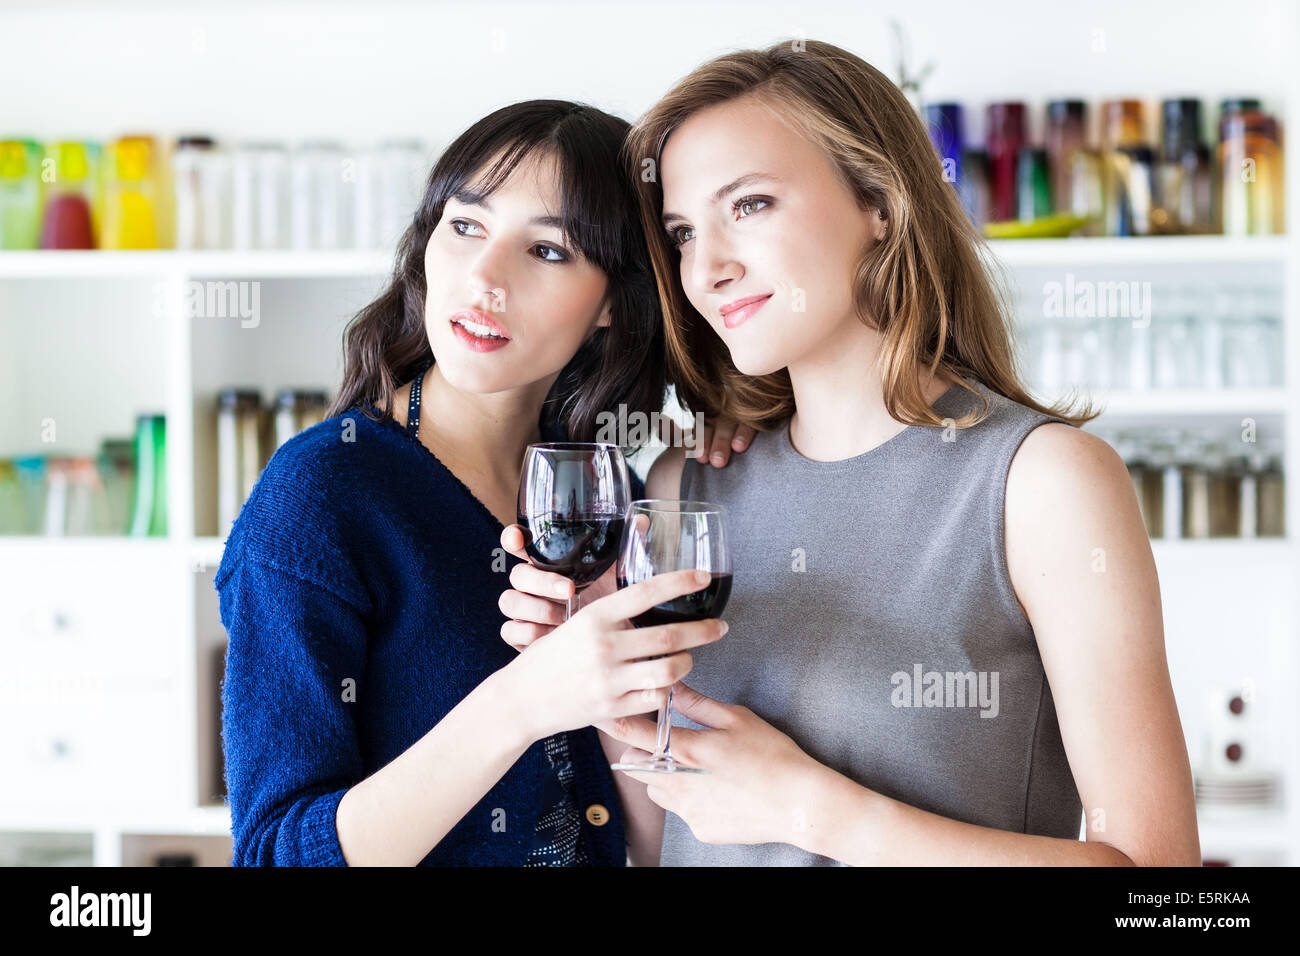 Women drinking a glass of red wine. Stock Photo